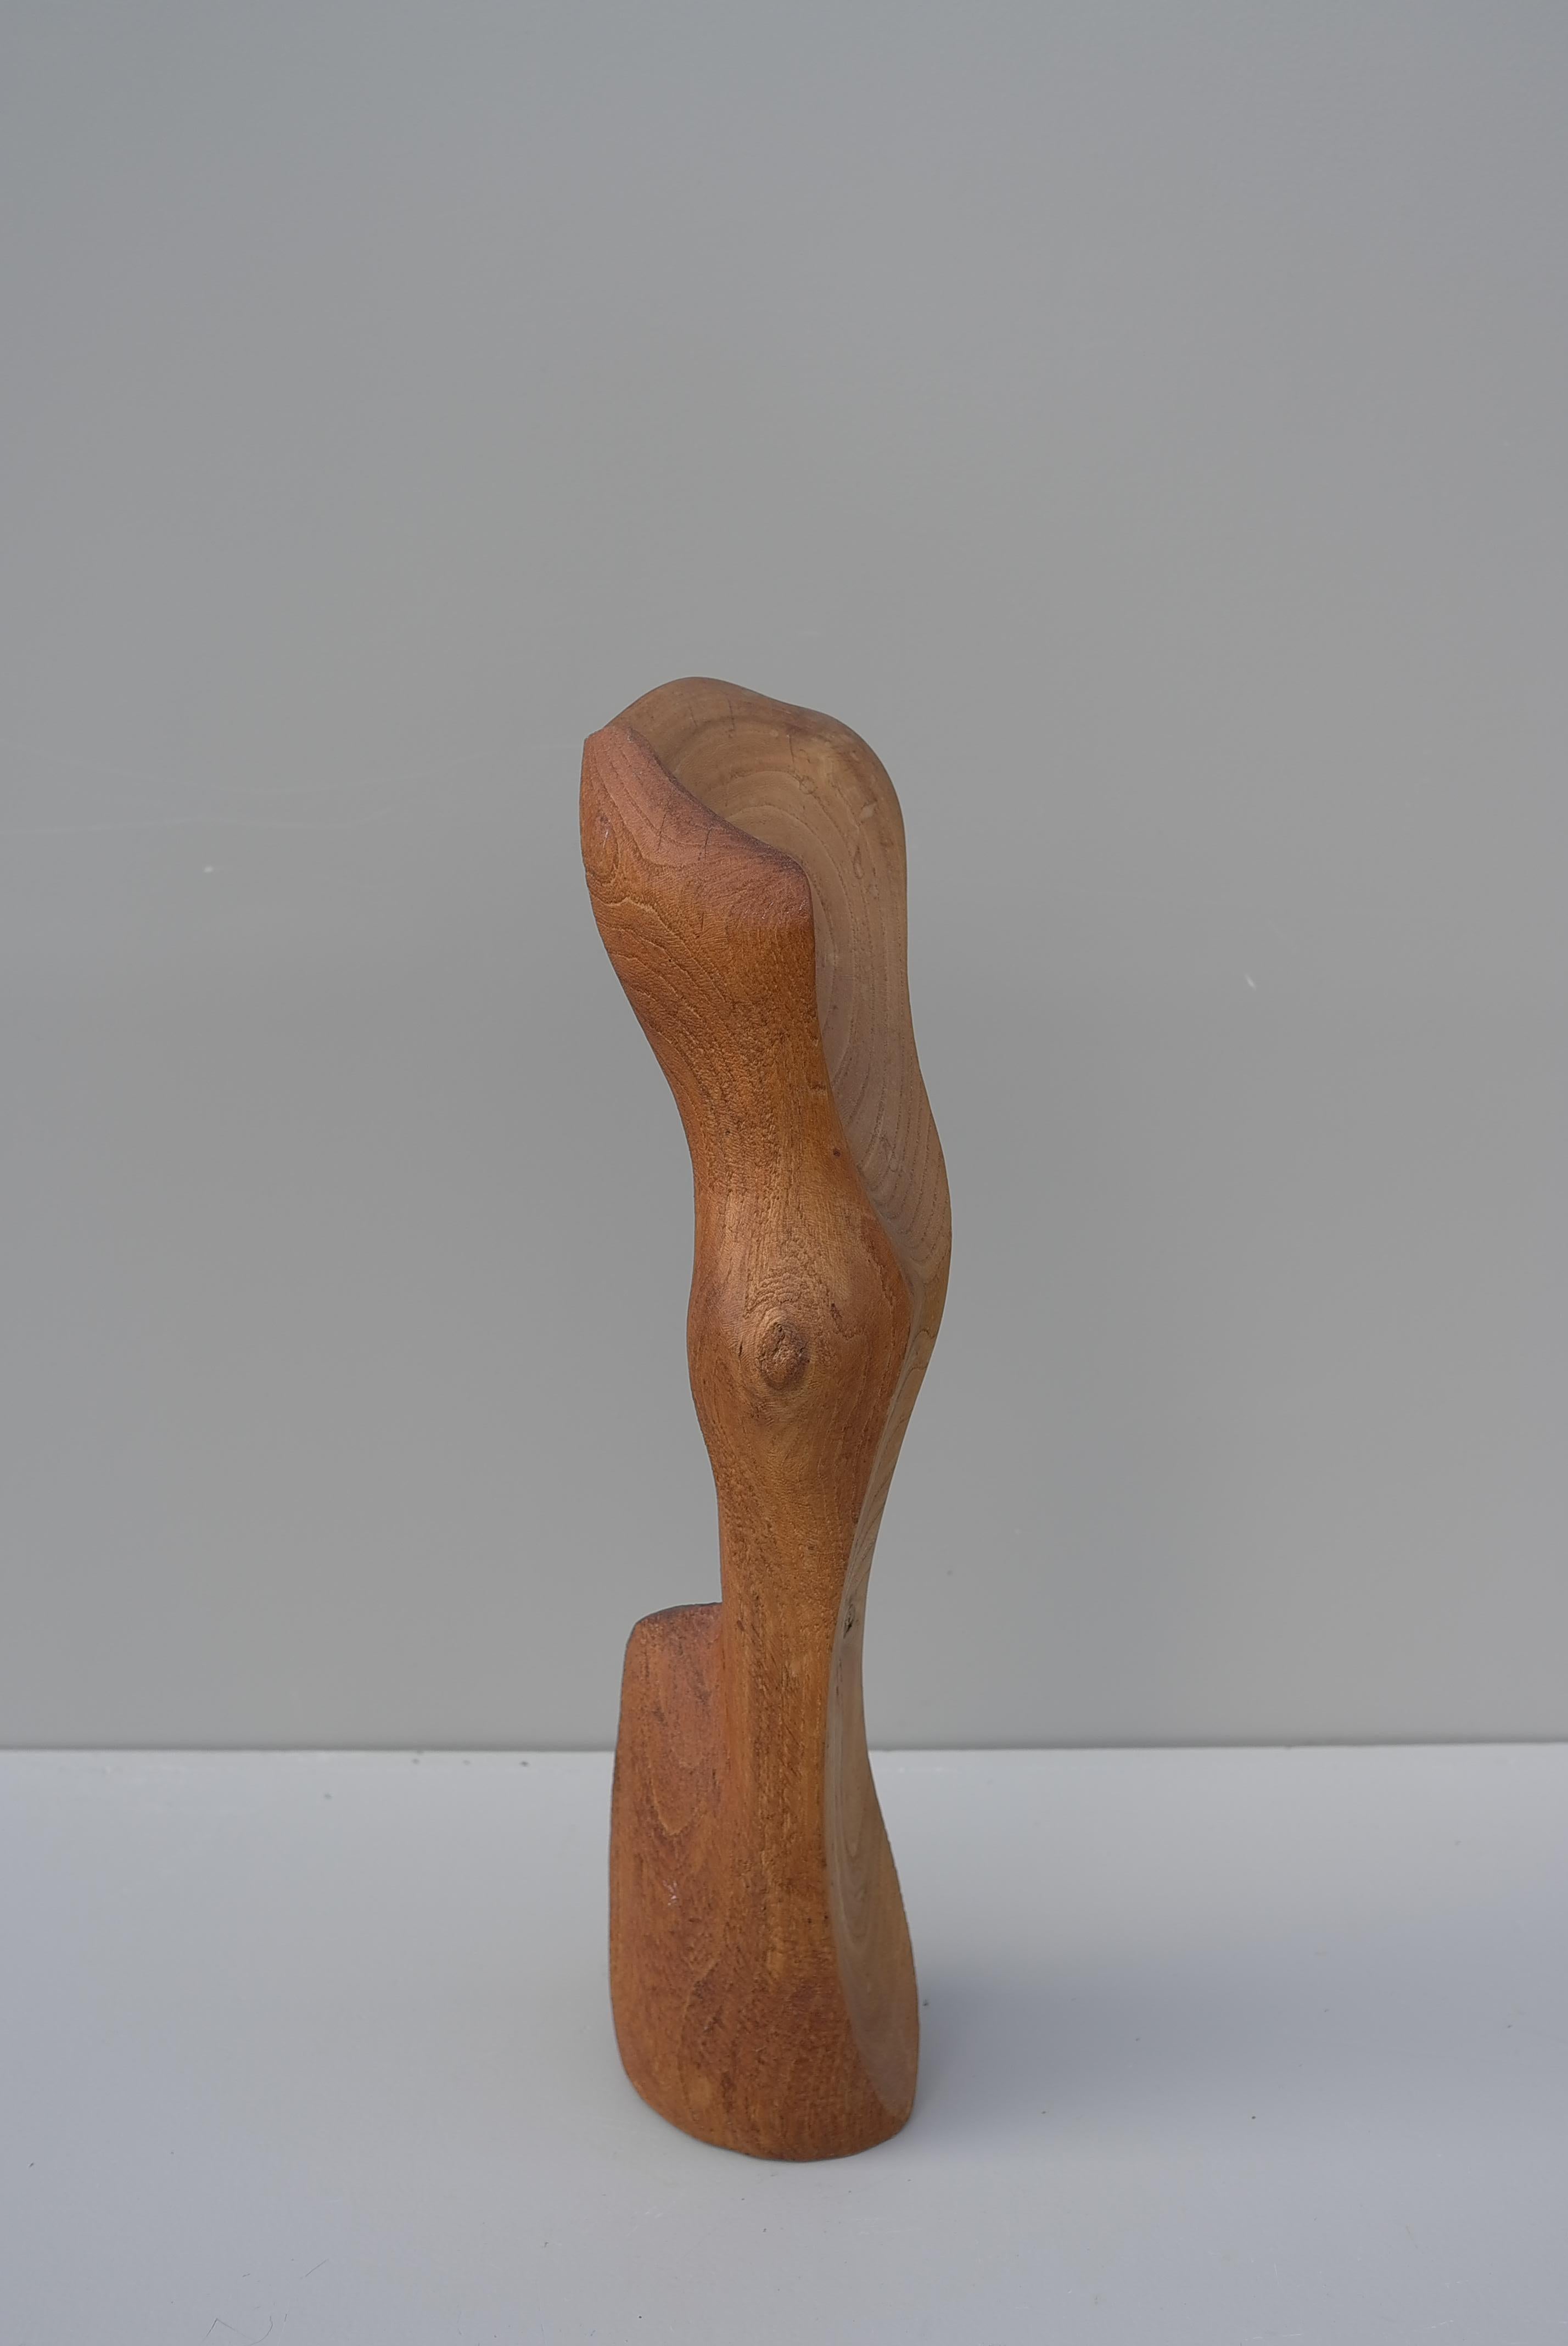  Abstract Mid-Century Modern Organic Wooden Sculpture, 1960's For Sale 7